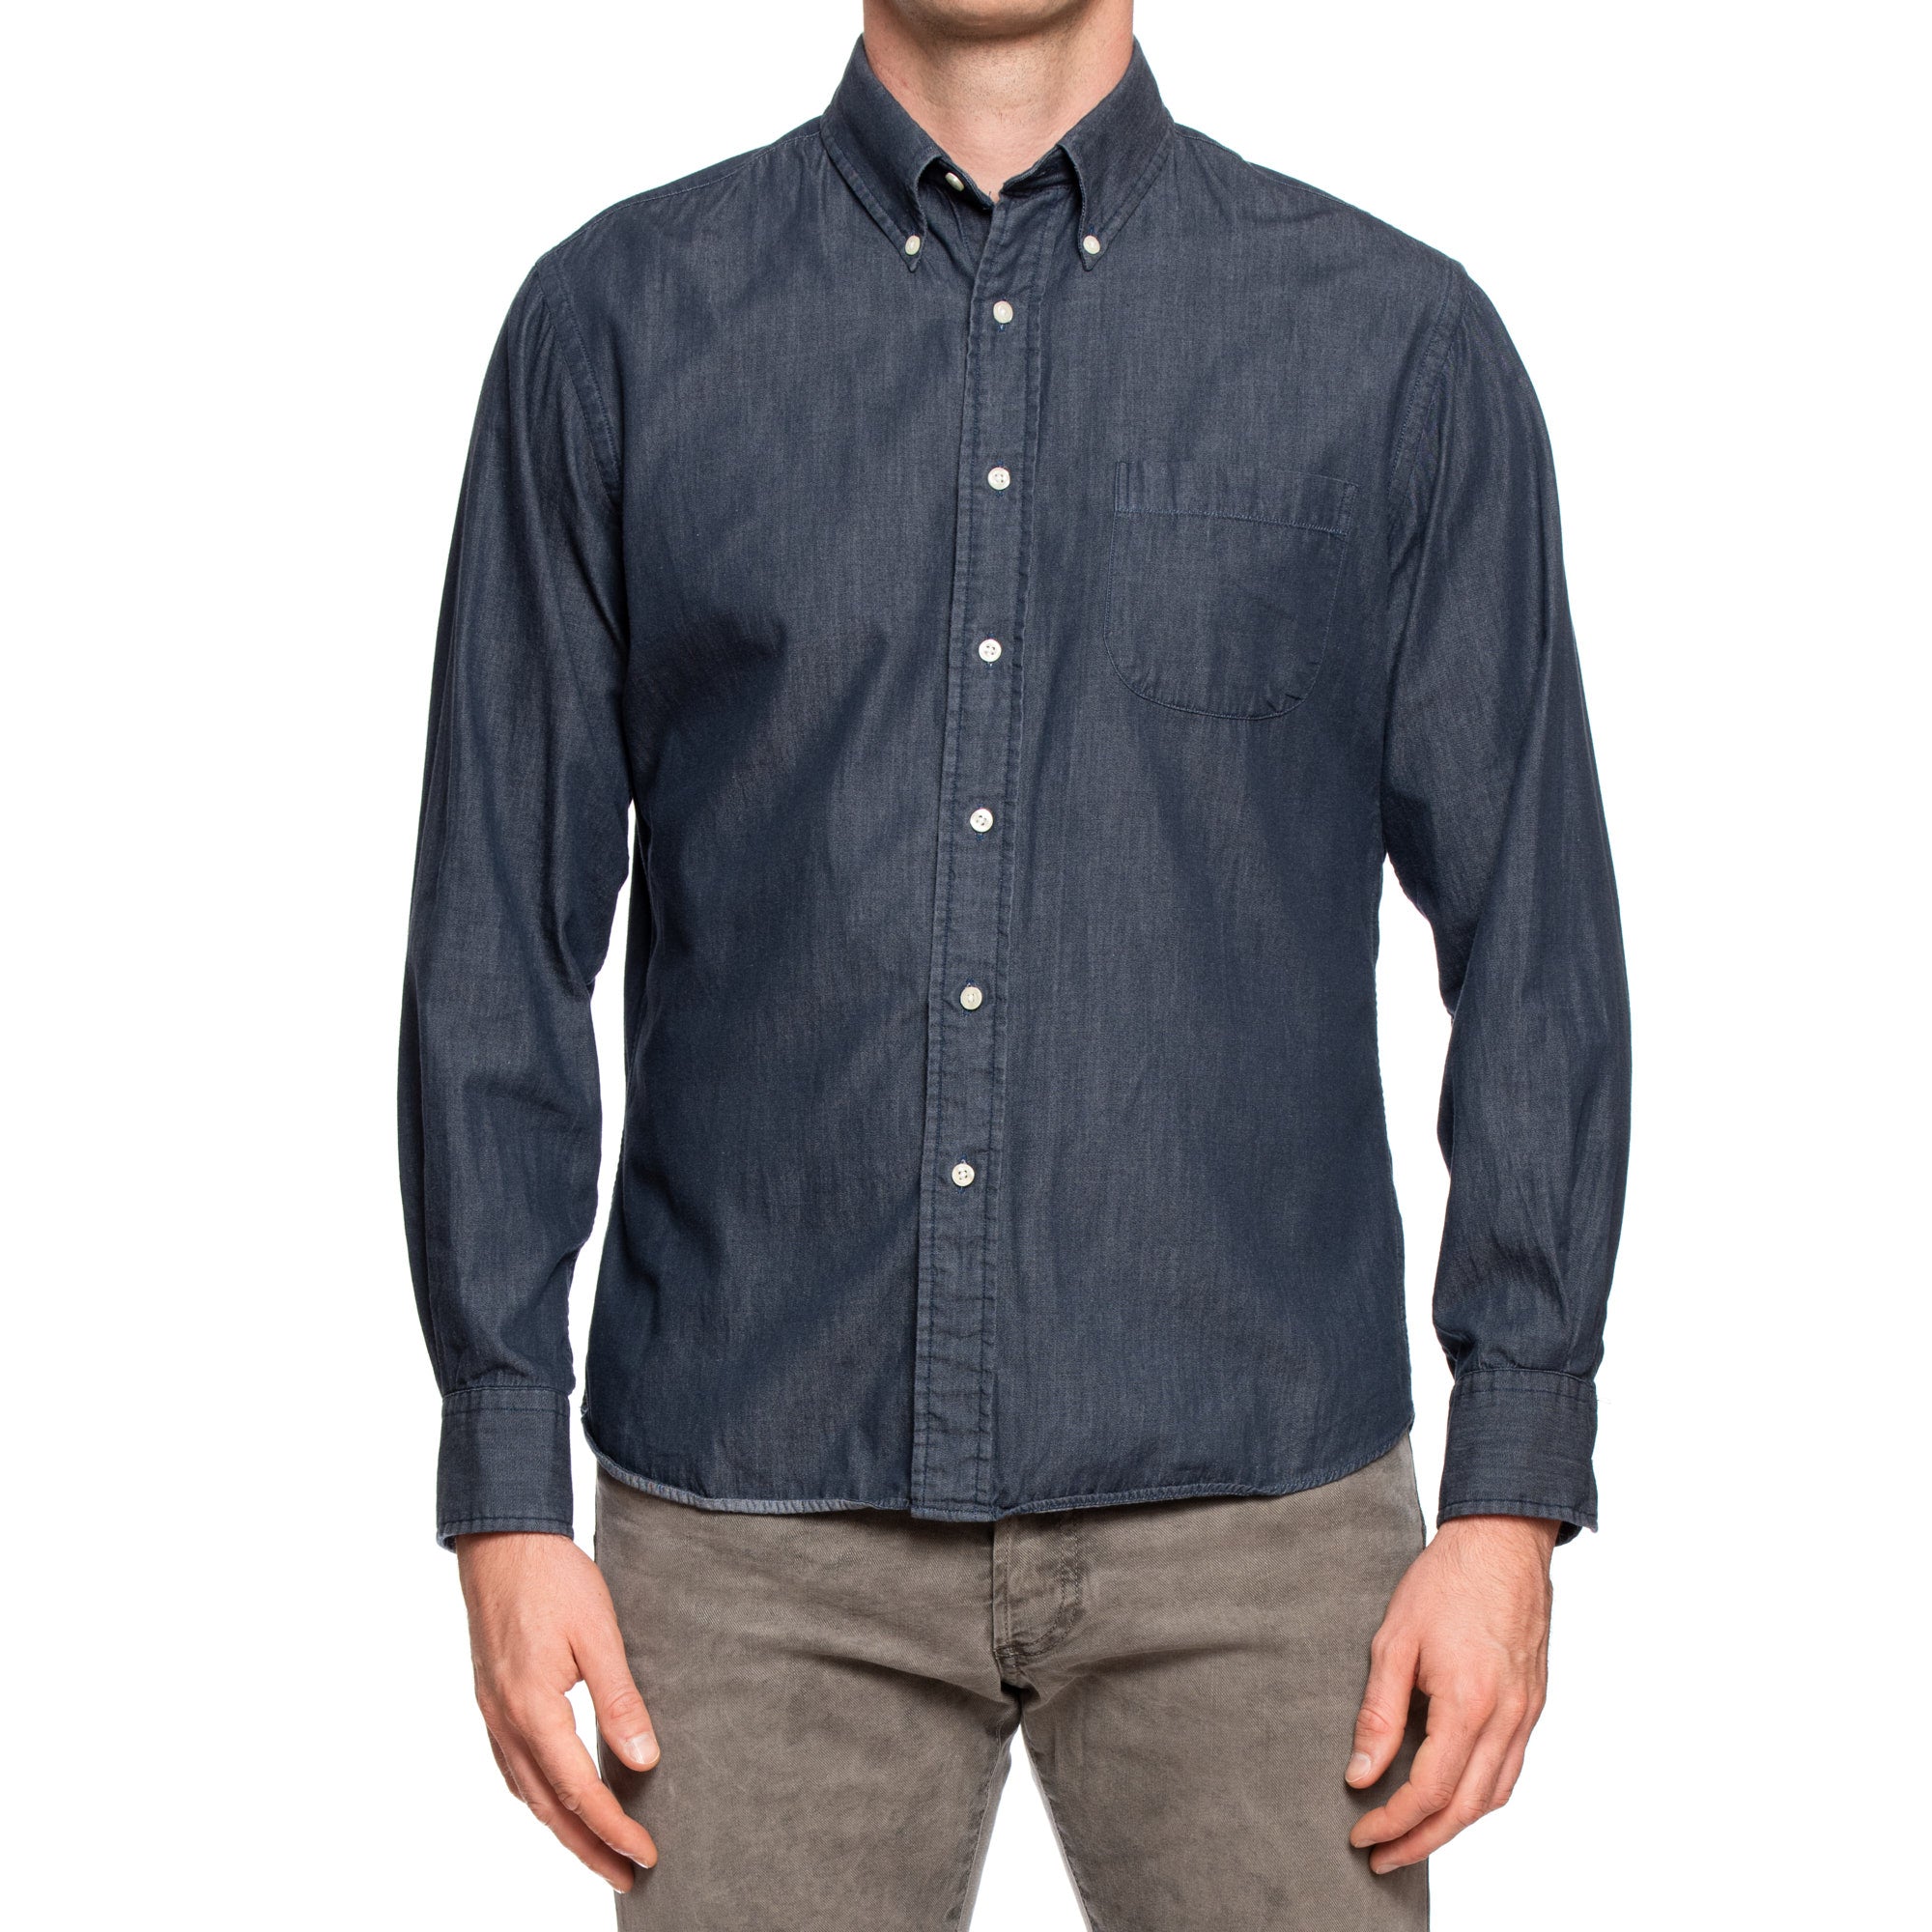 UNIONMADE Blue Denim Button-Down Casual Shirt NEW US L UNIONMADE